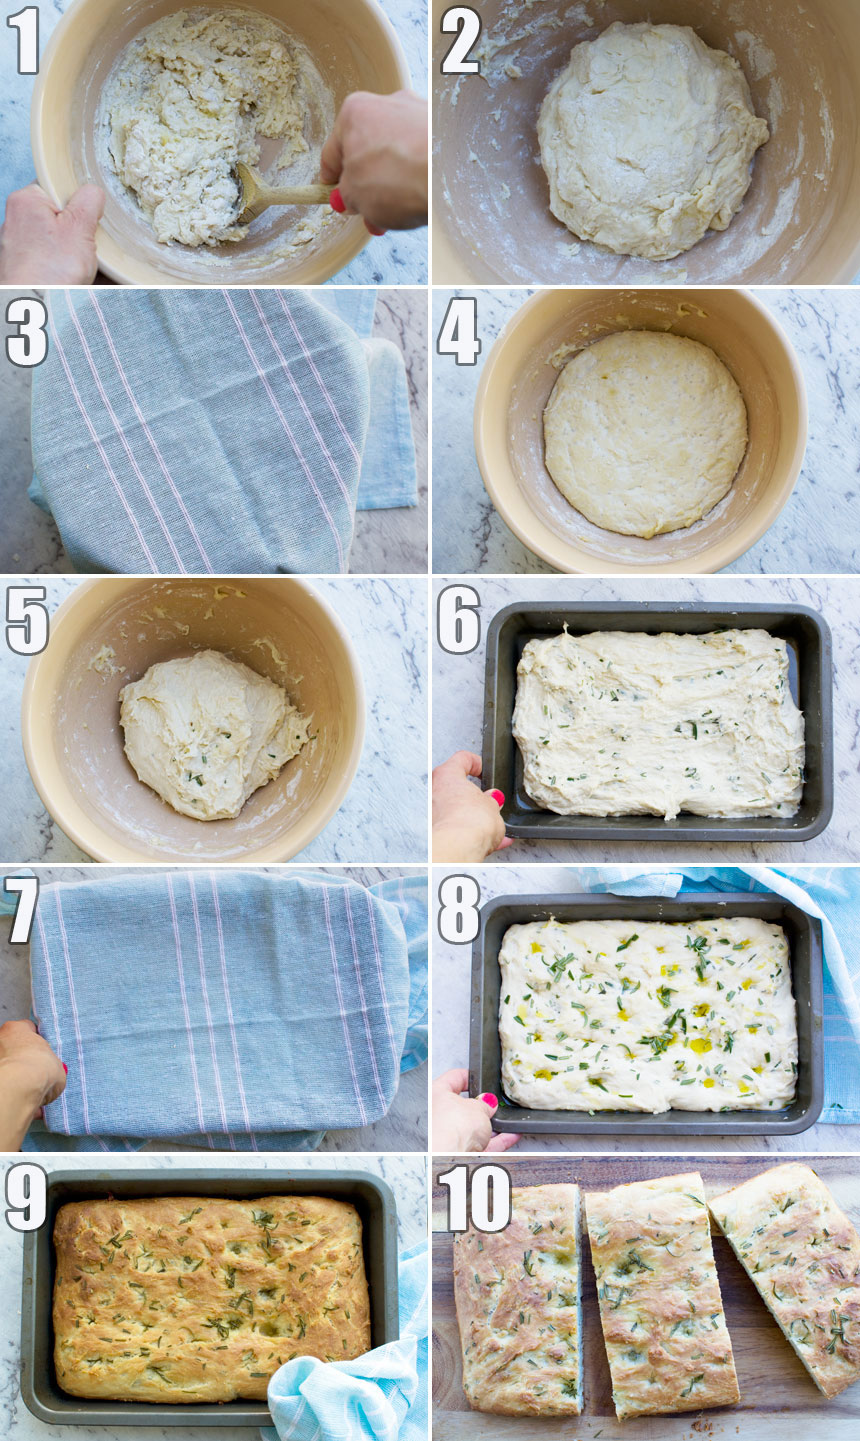 A collage of process shots showing how to make Italian focaccia bread